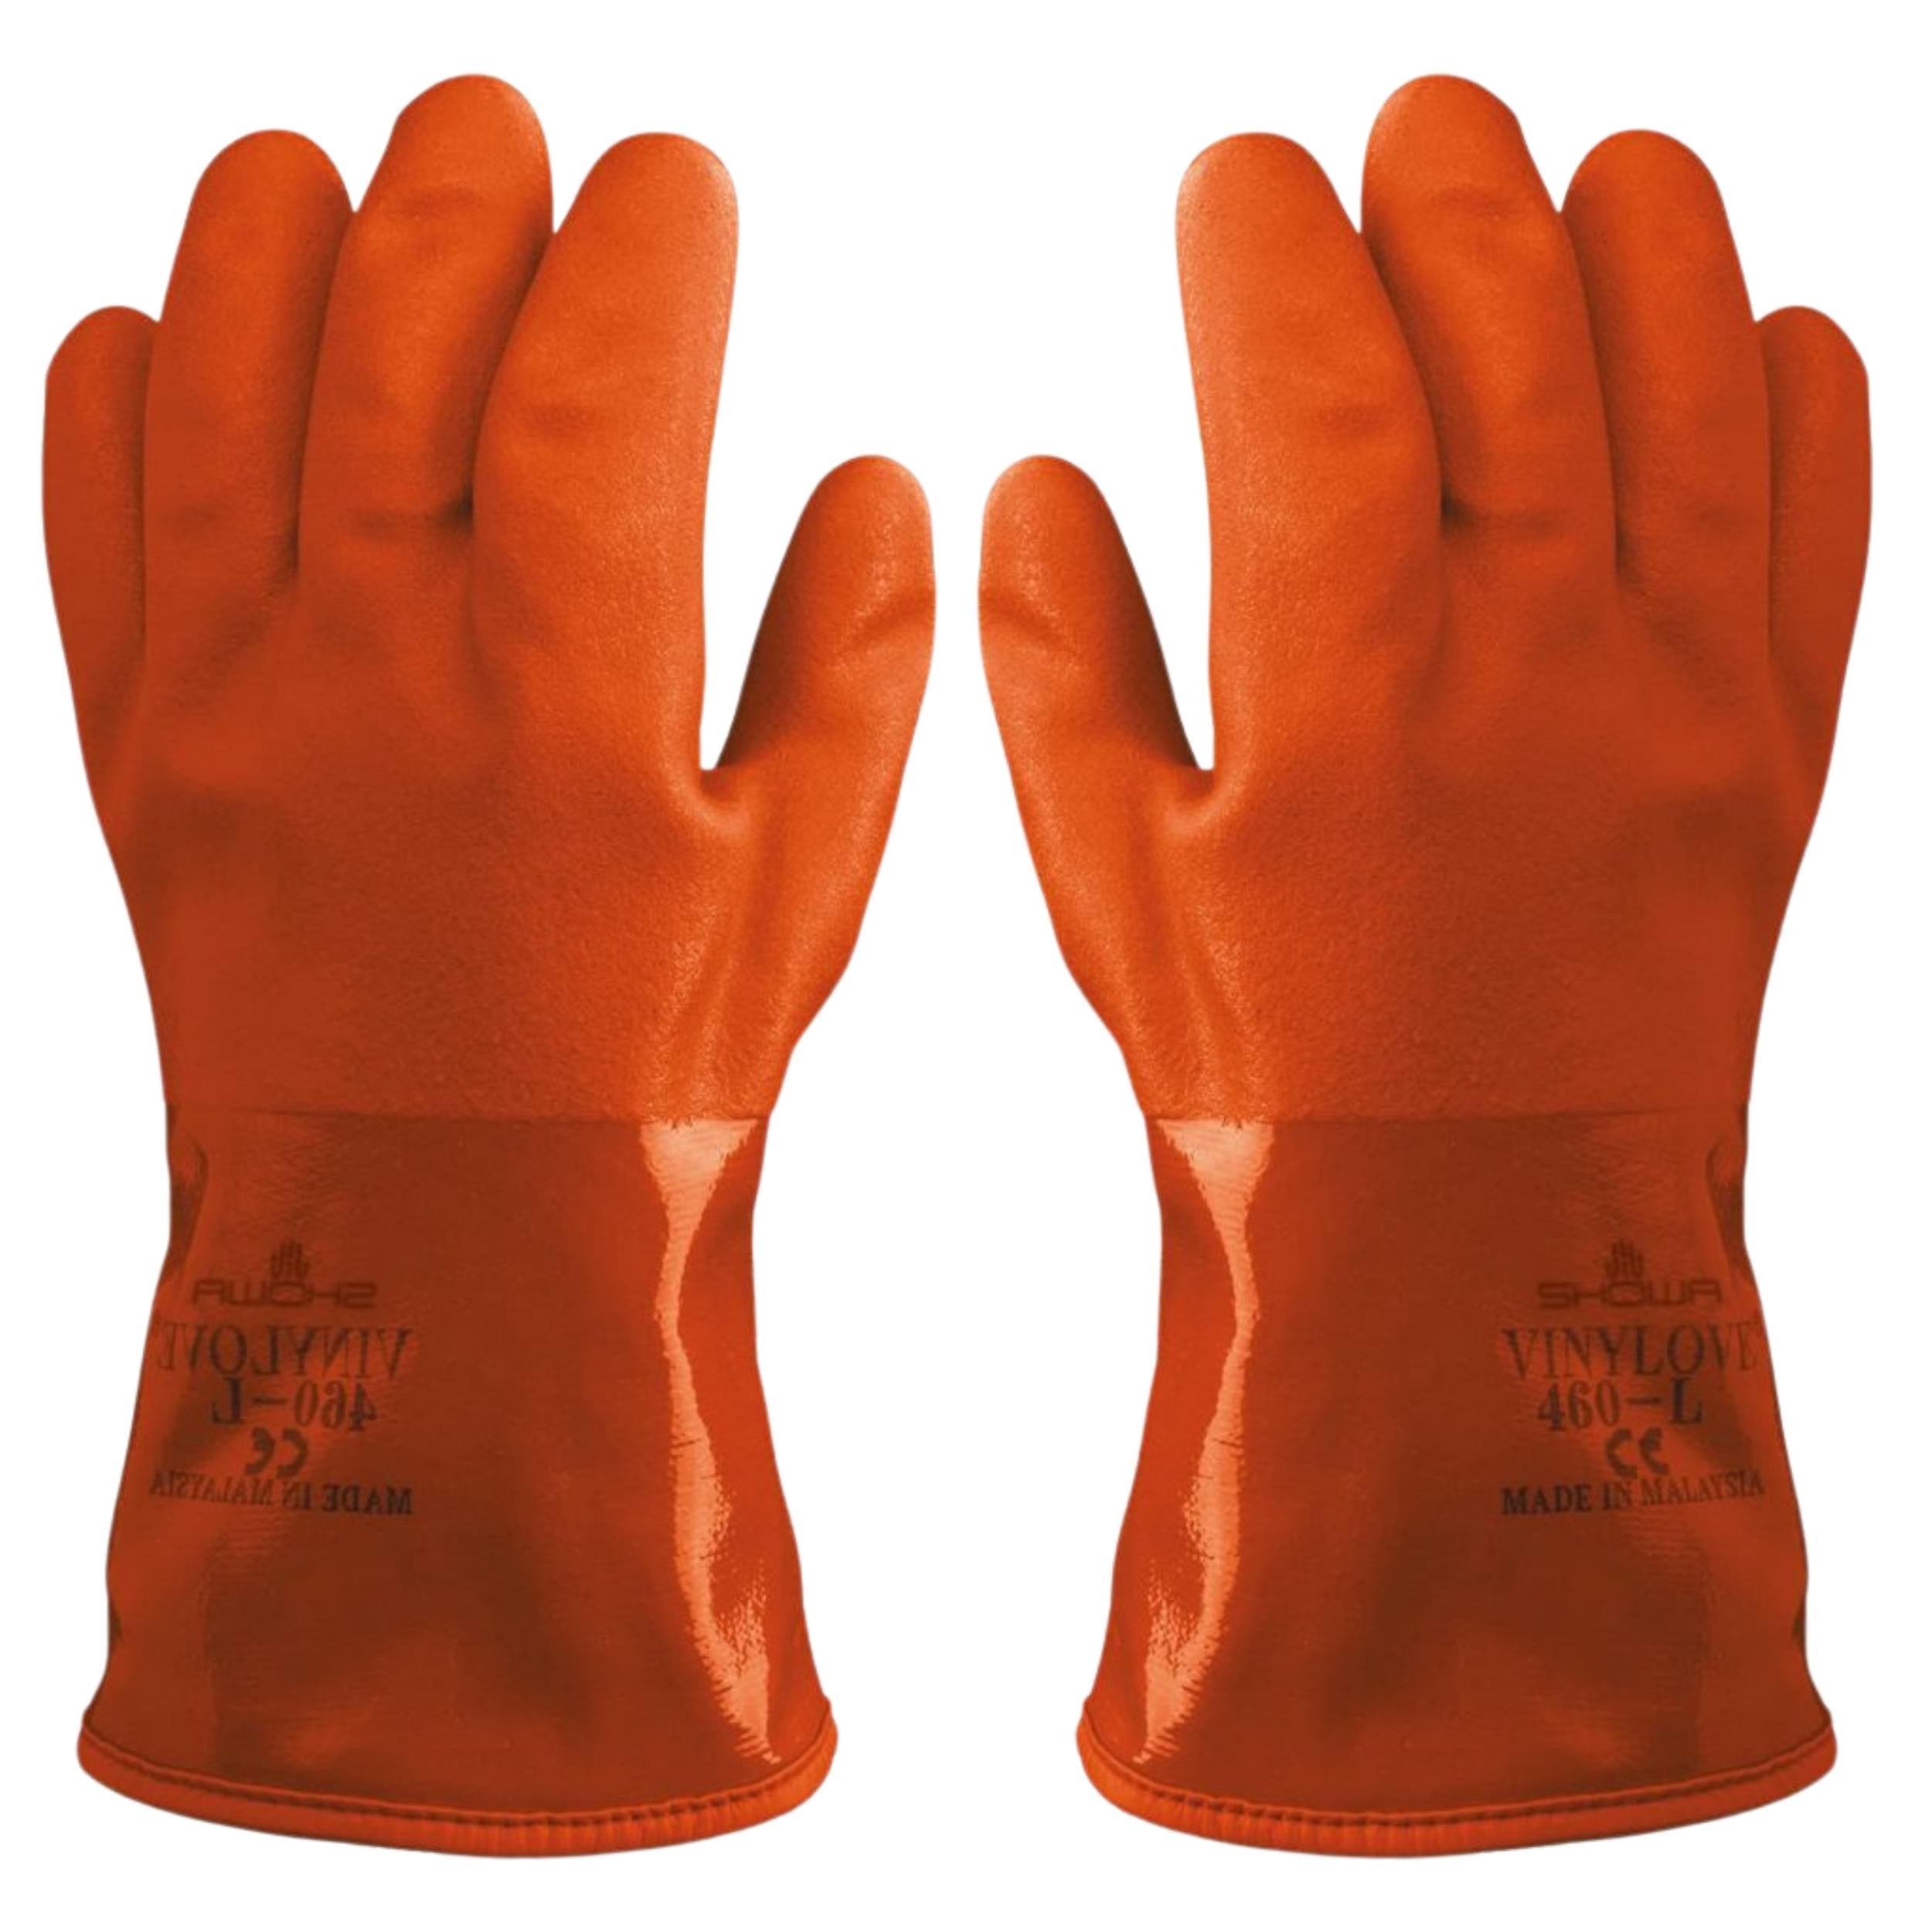 SHOWA 460: Cold-Resistant Gloves